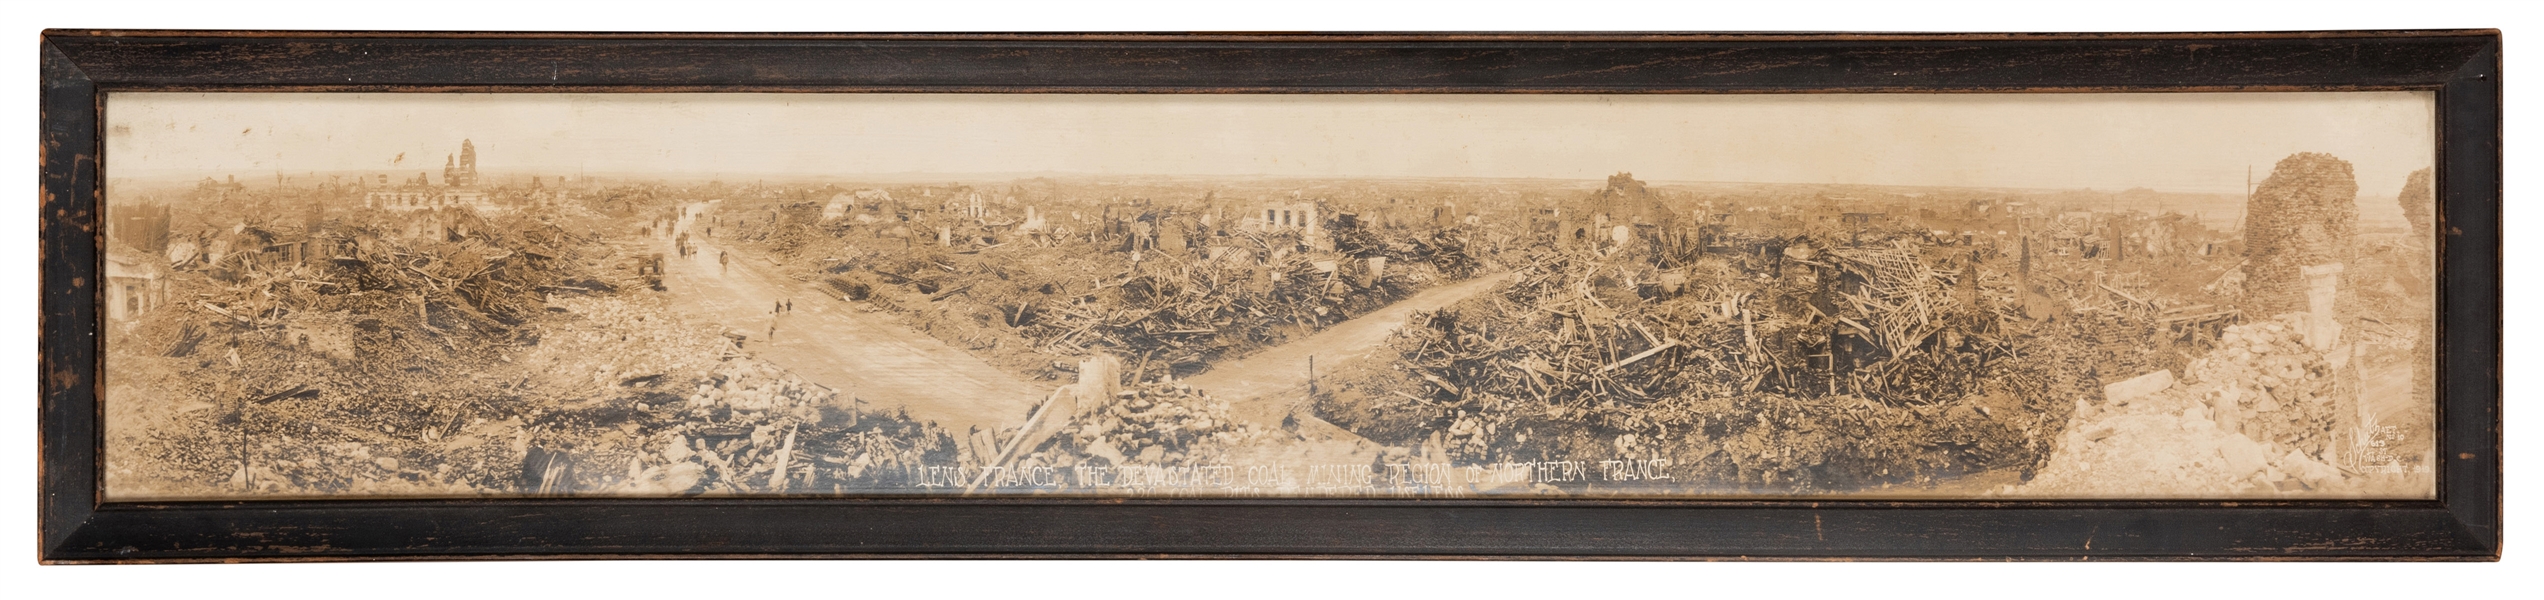 World War I Panorama Photograph. Lens, France. The Devastated Coal Mining Region of Northern France.